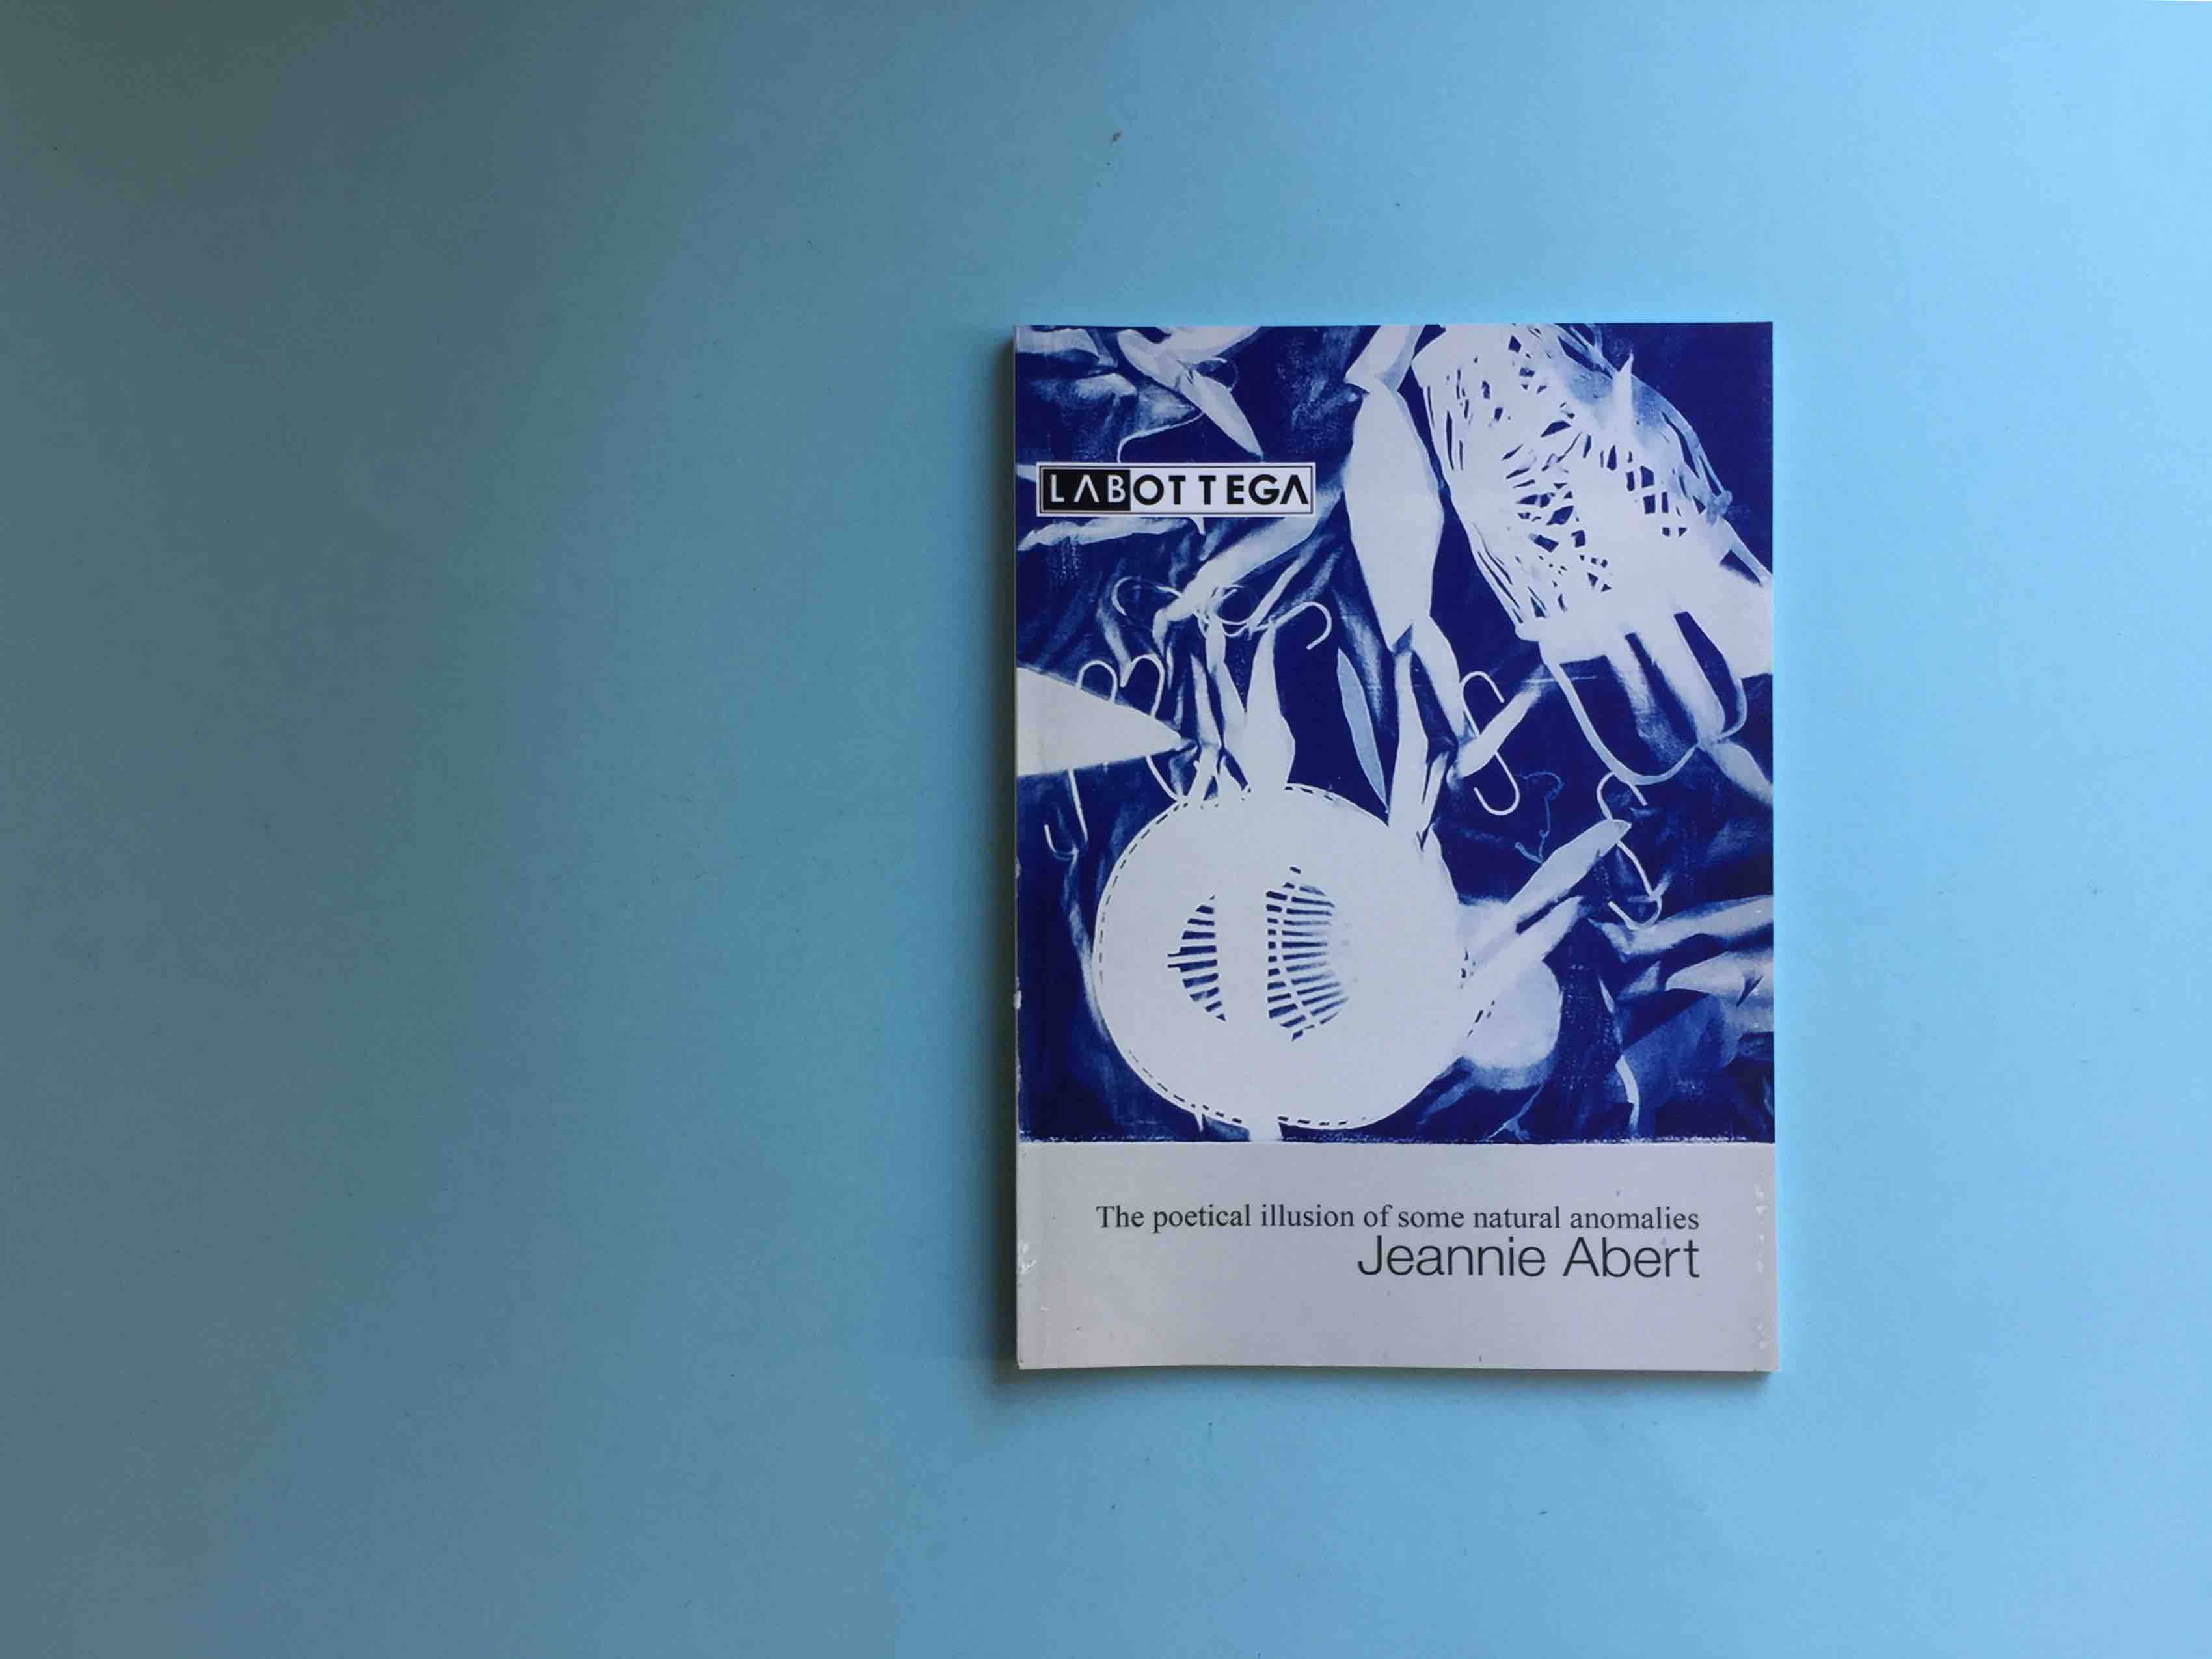 JEANNIE ABERT / THE POETICAL ILLUSION OF SOME NATURAL ANOMALIES